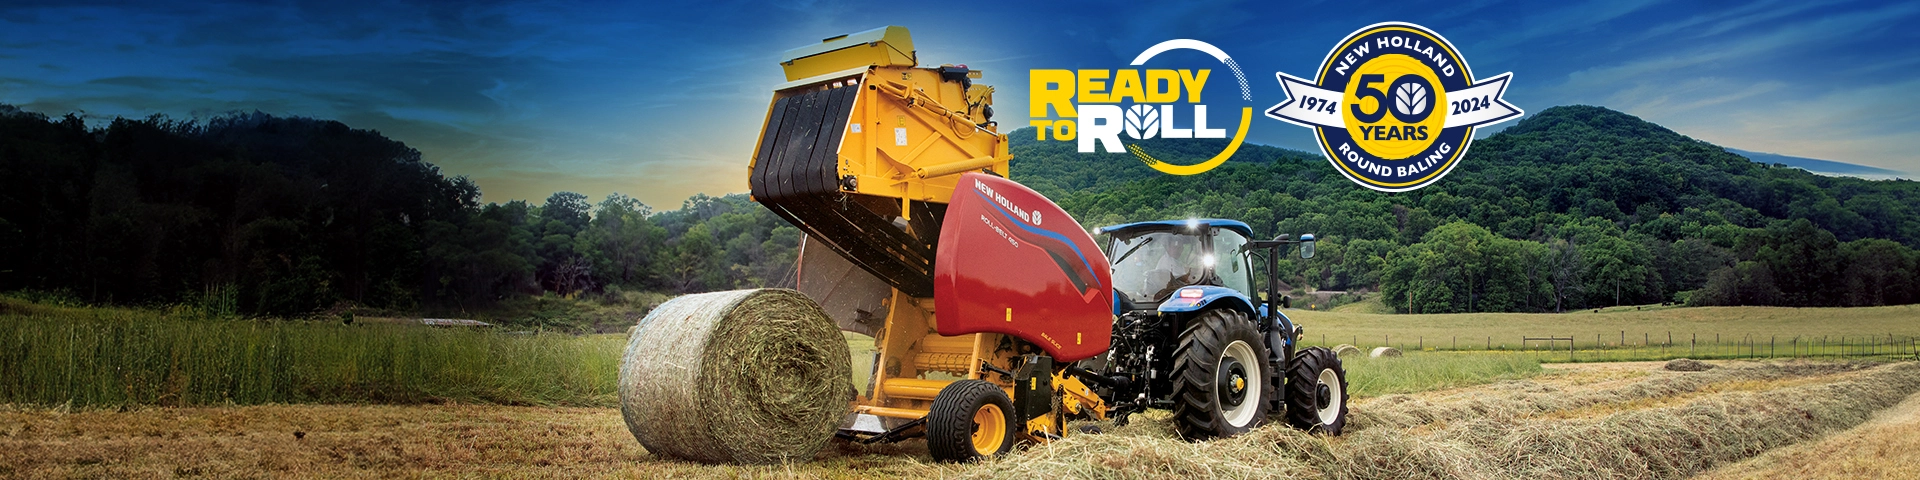 Special offers on New Holland haytools